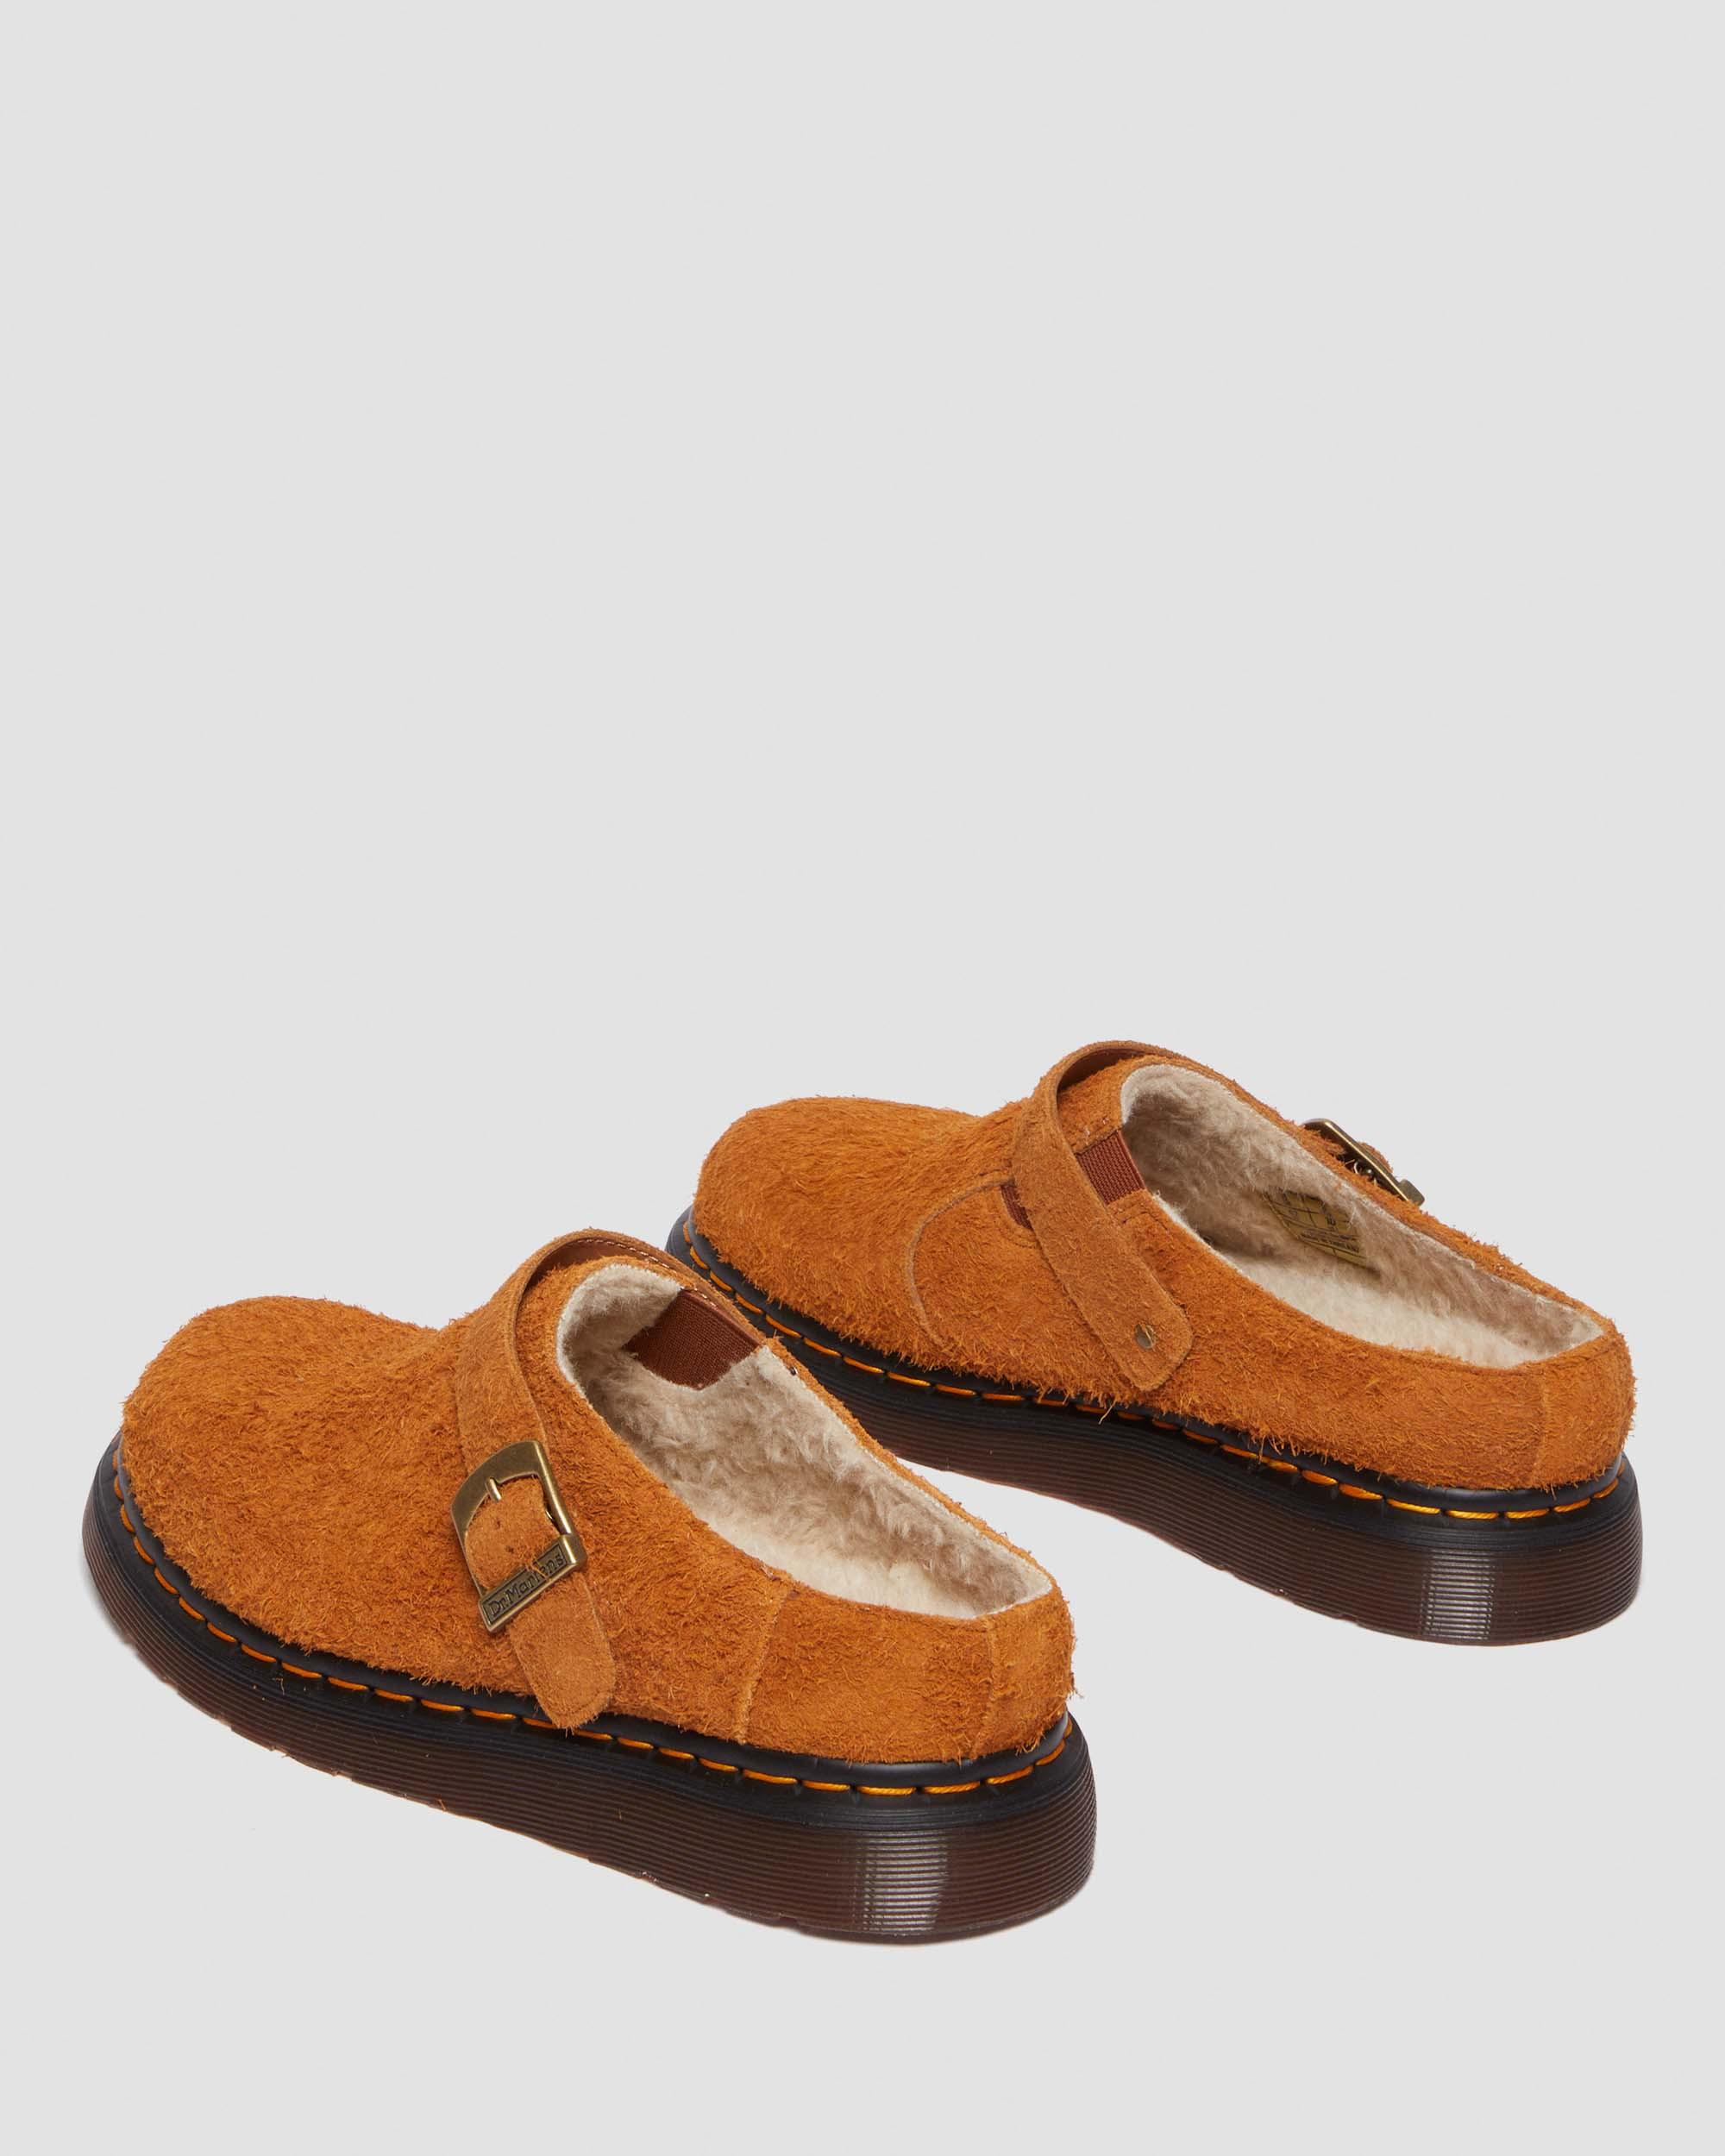 Isham Faux Shearling Lined Suede Mules in PECAN BROWN